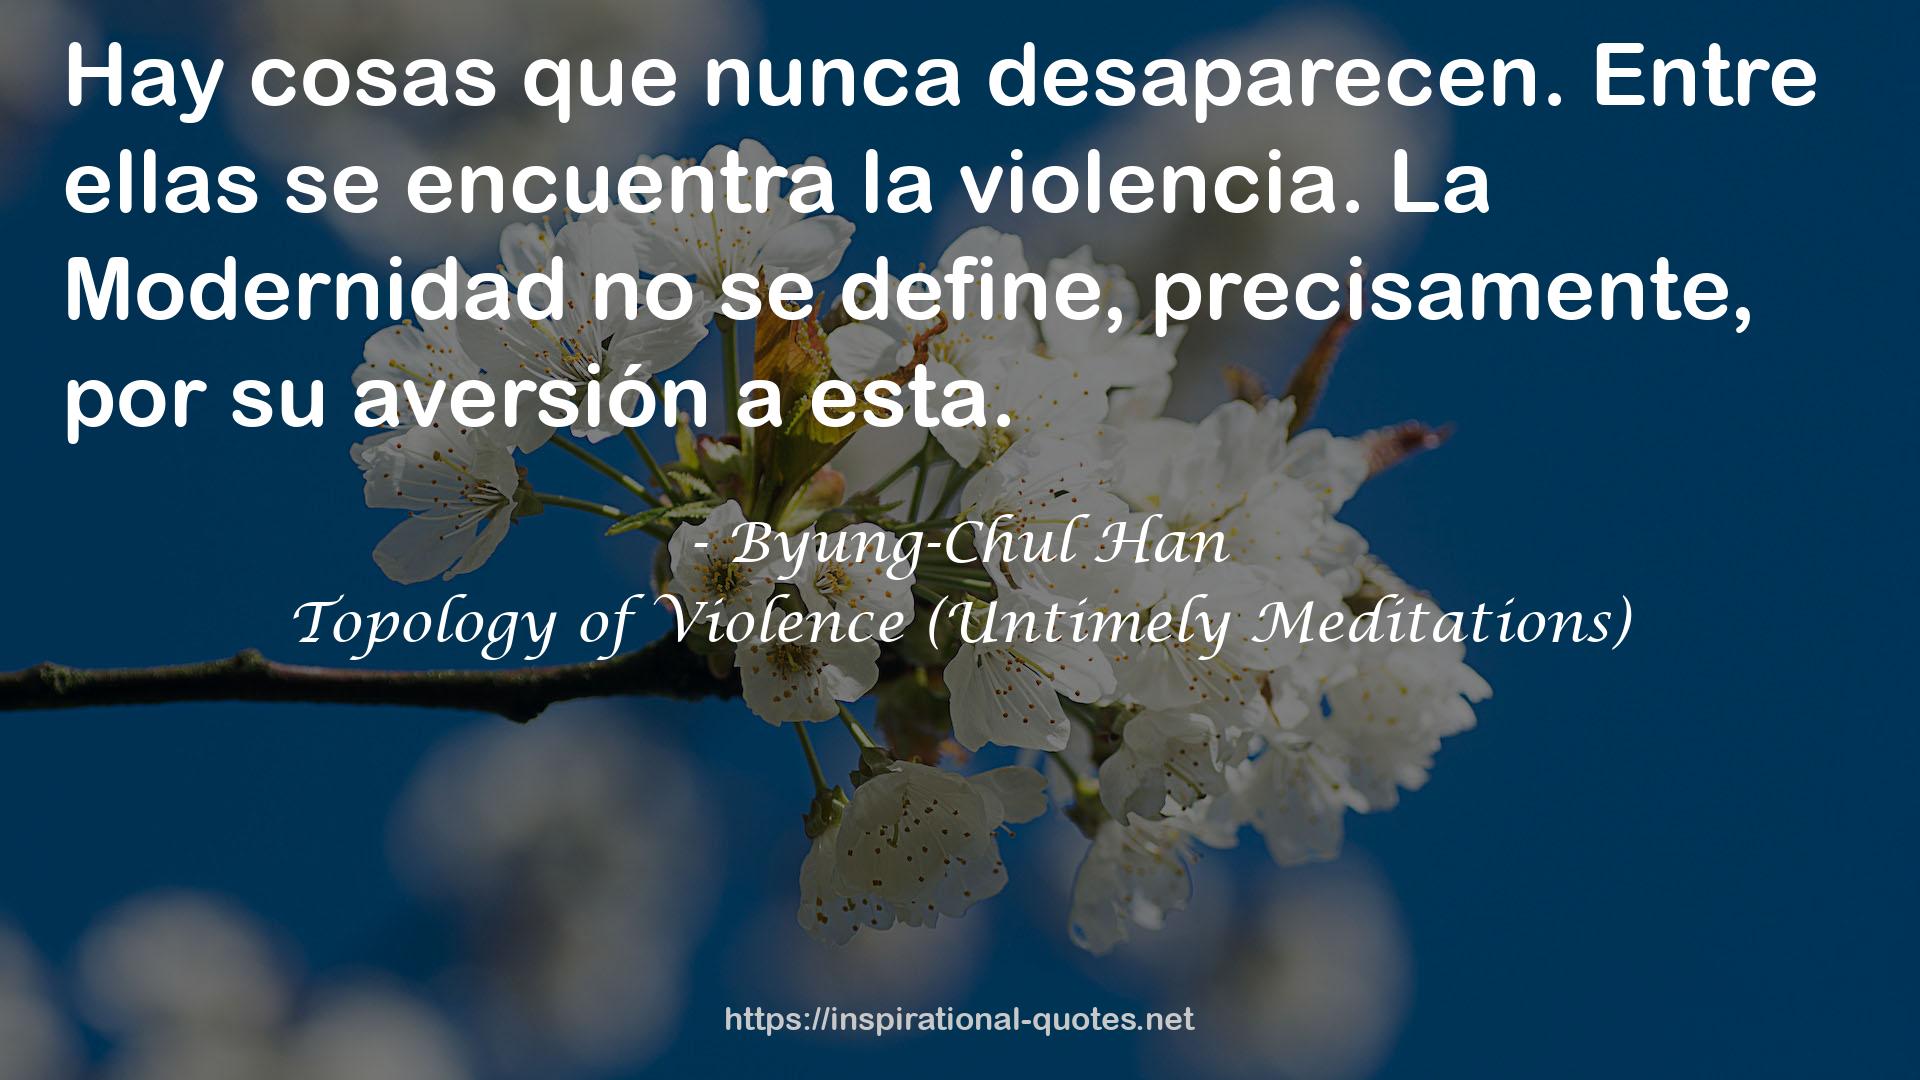 Topology of Violence (Untimely Meditations) QUOTES